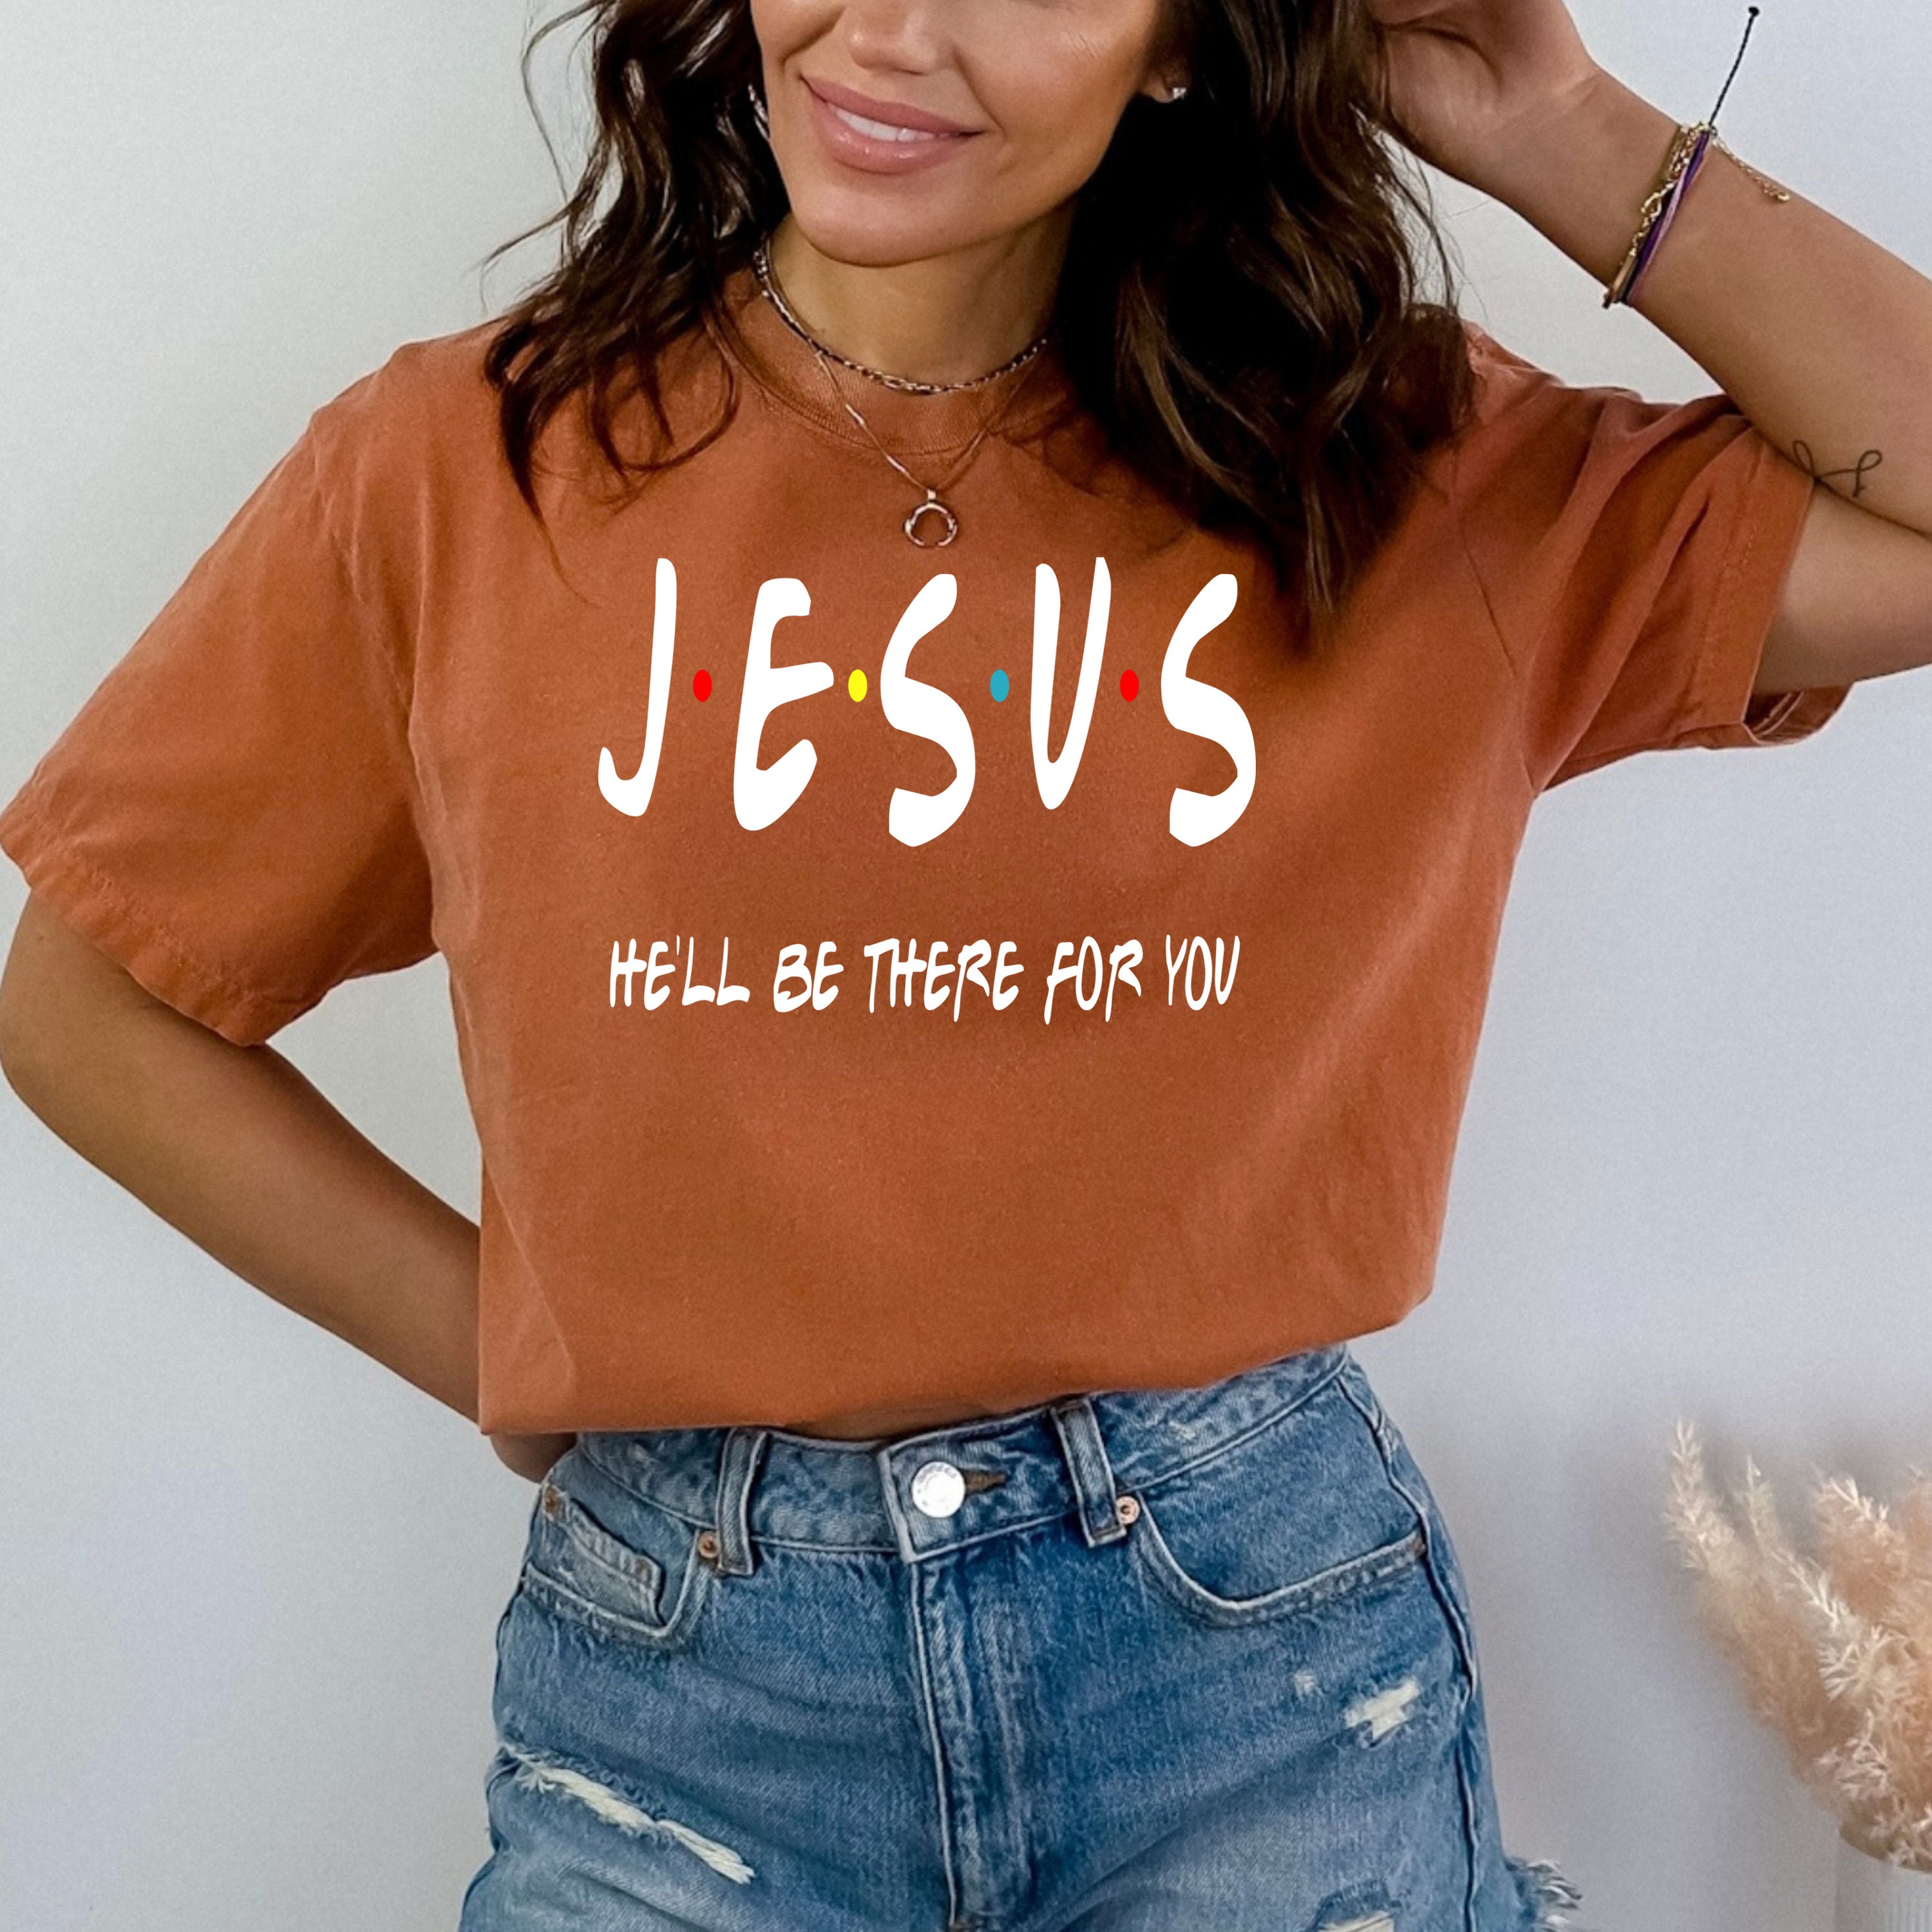 Jesus He'll Be There For You - Bella canvas